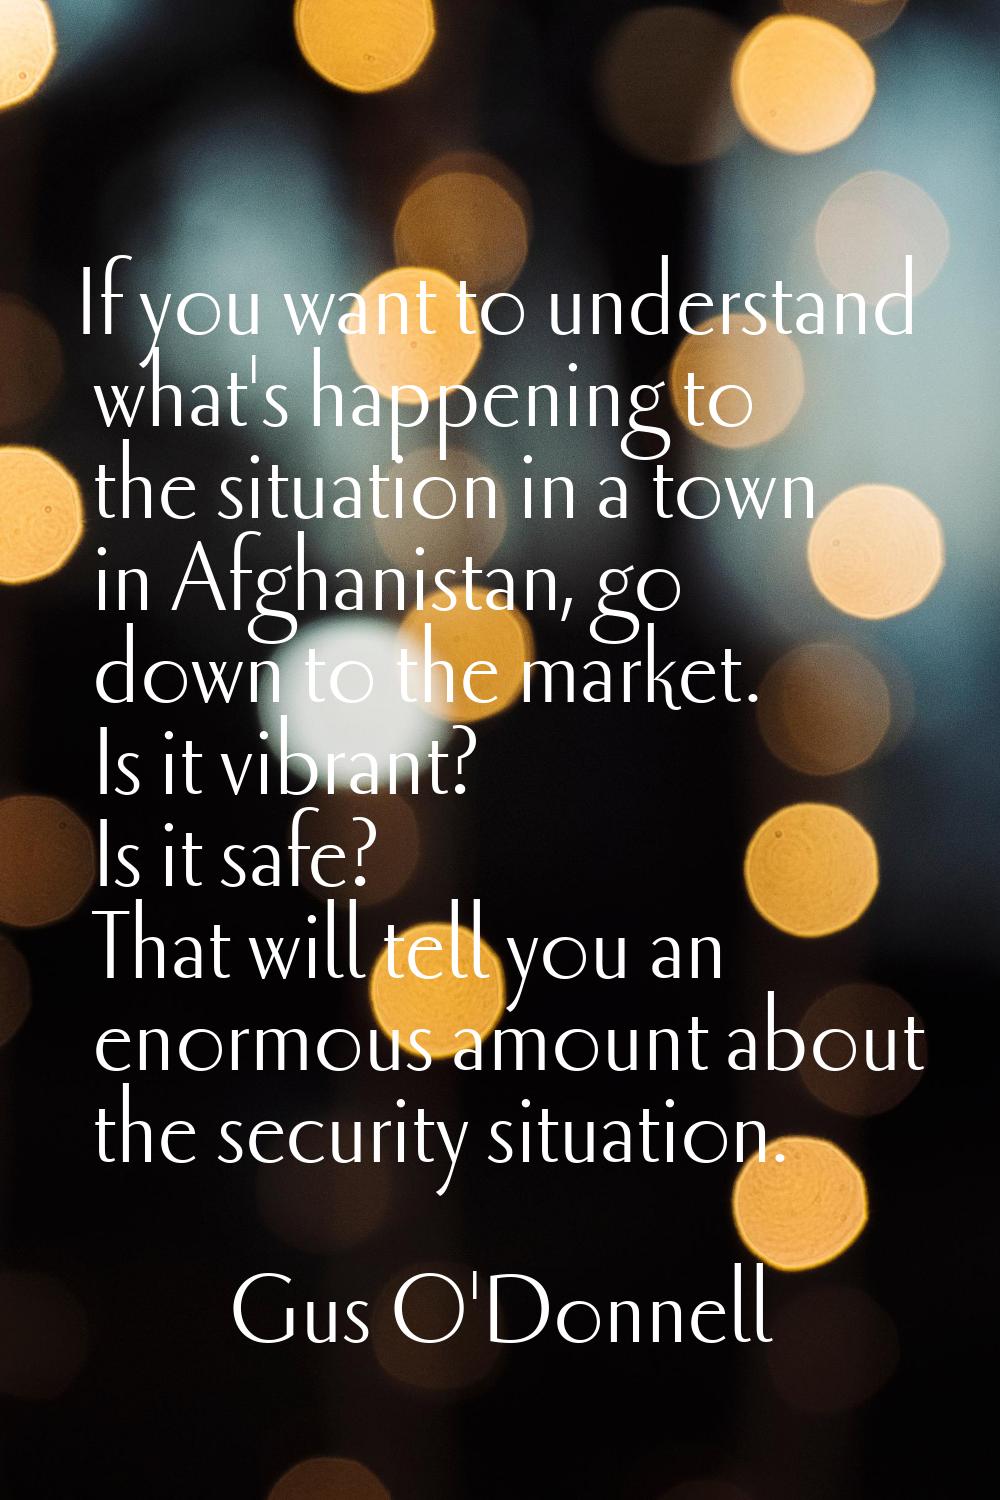 If you want to understand what's happening to the situation in a town in Afghanistan, go down to th